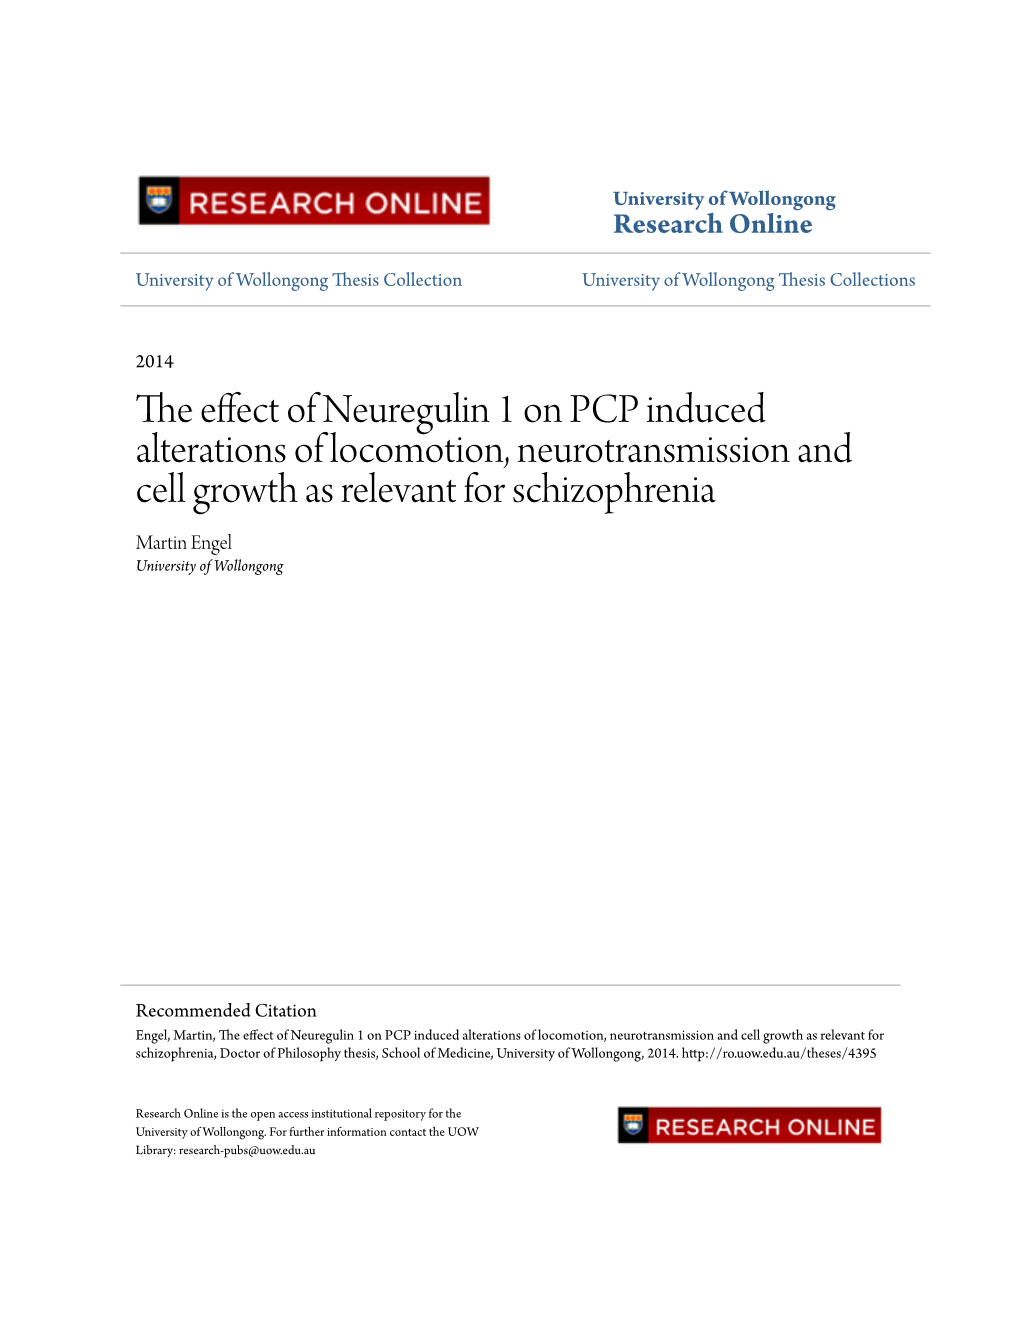 The Effect of Neuregulin 1 on PCP Induced Alterations of Locomotion, Neurotransmission and Cell Growth As Relevant for Schizophr